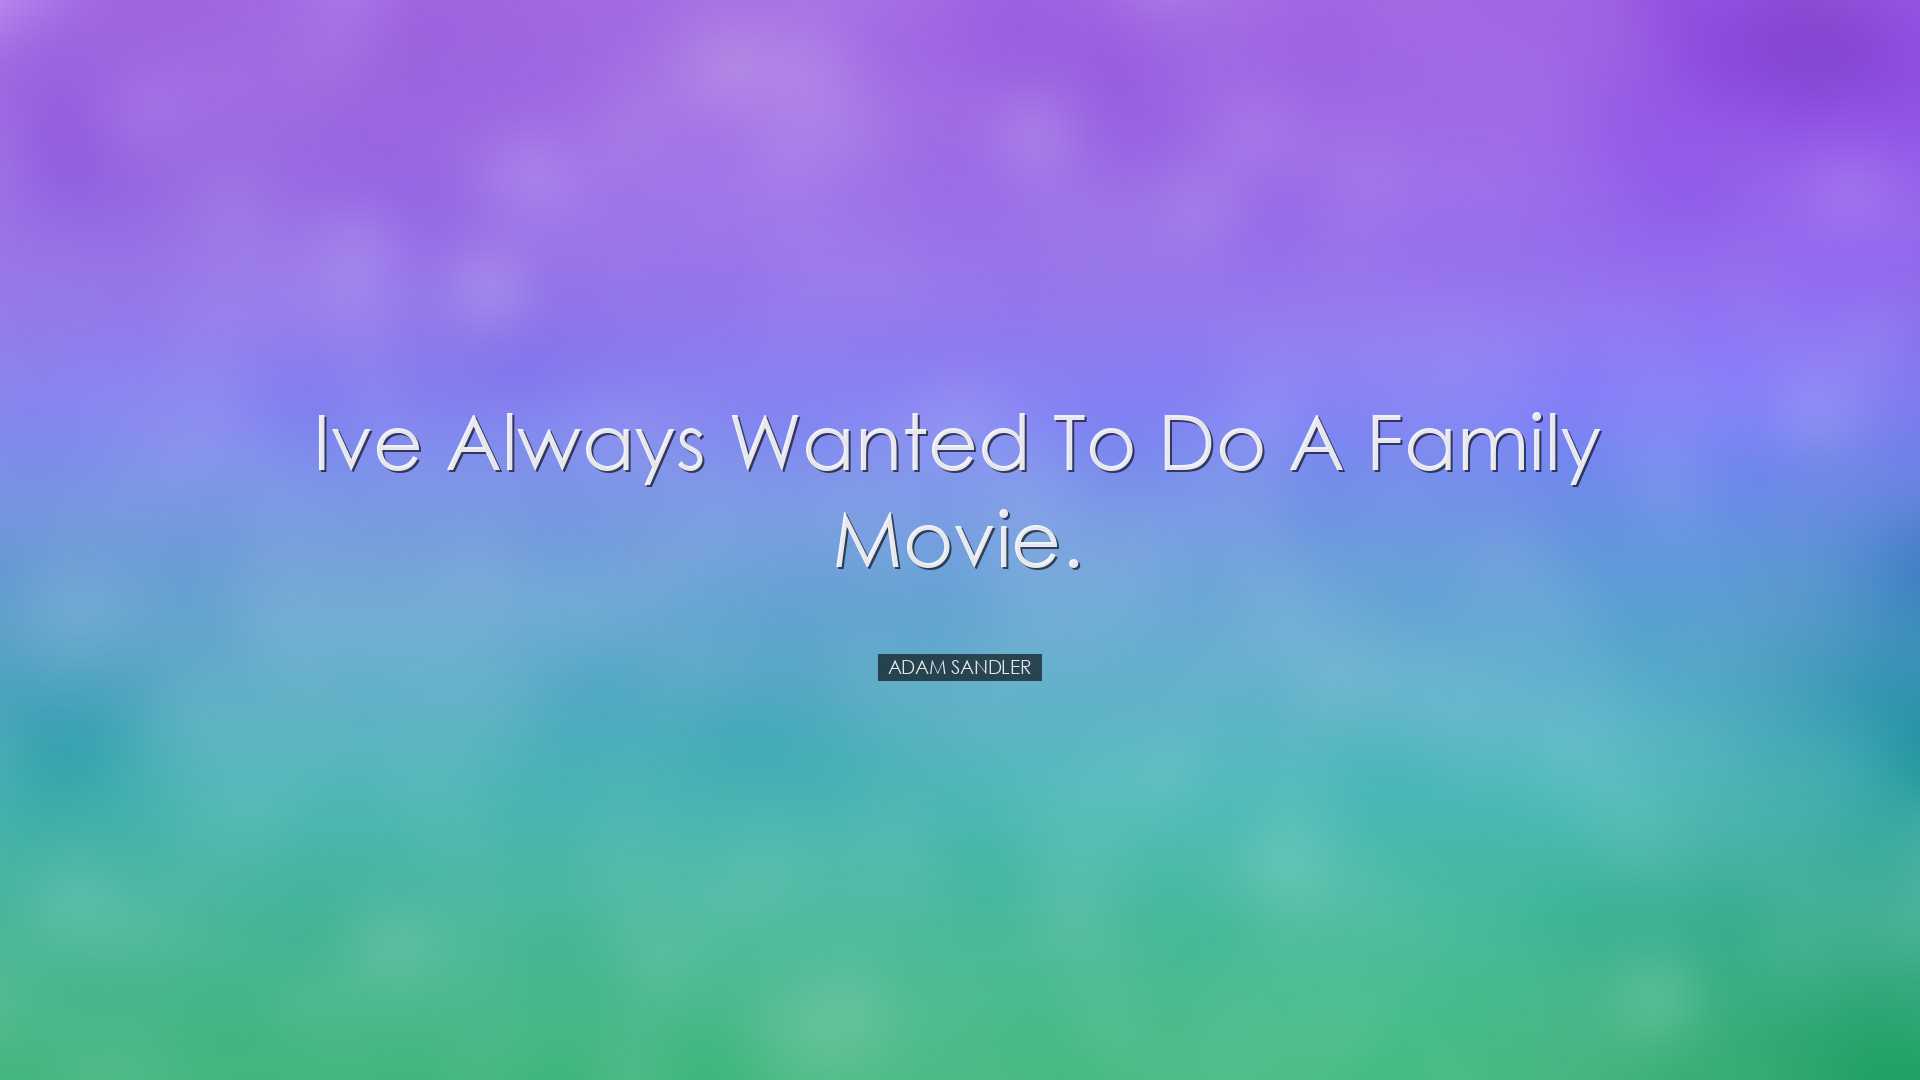 Ive always wanted to do a family movie. - Adam Sandler